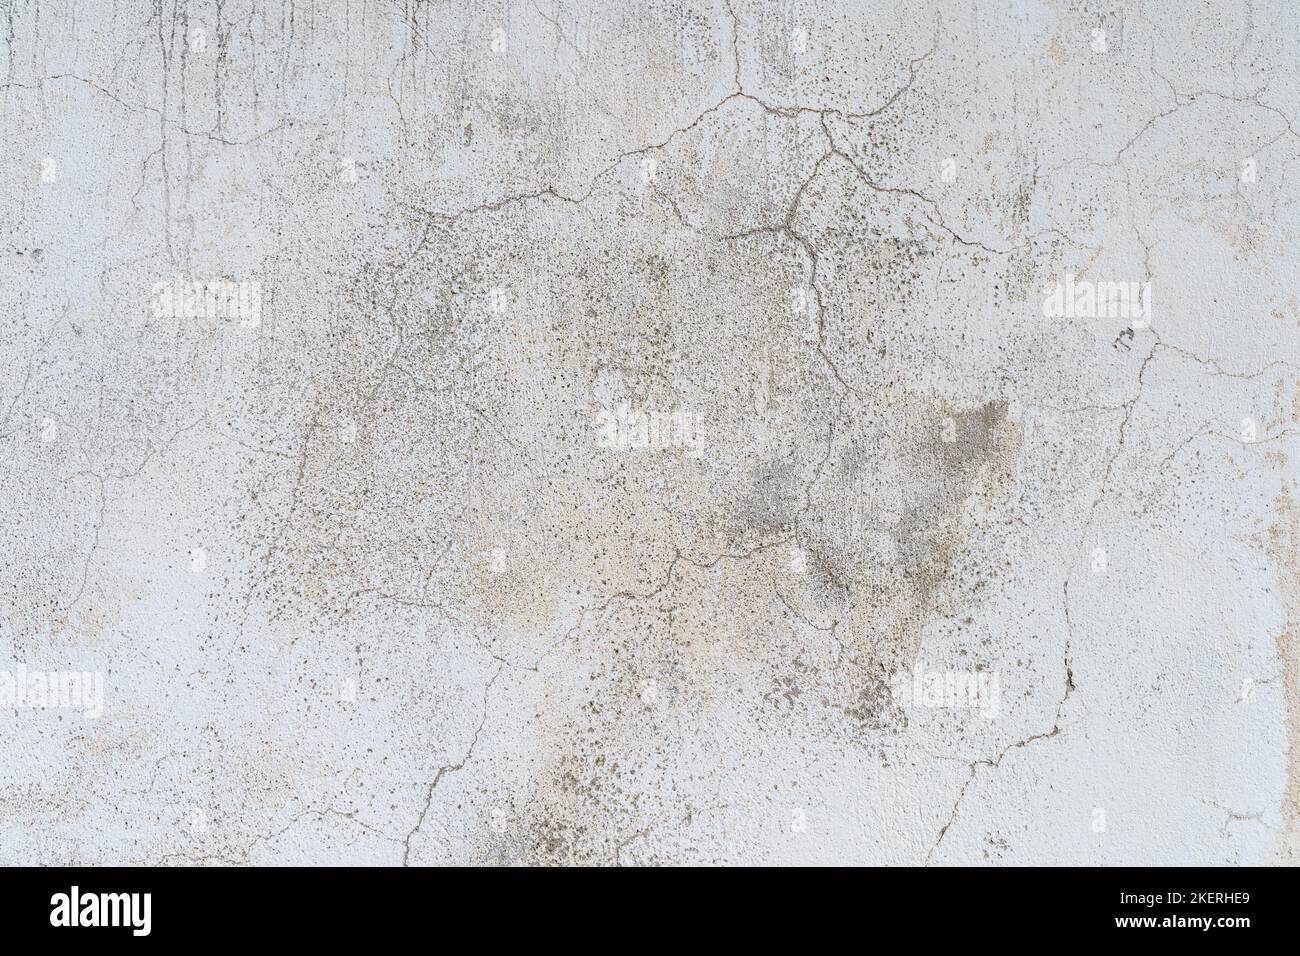 Old concrete stone wall covered with cracked plaster and dirty grunge textured surface. High quality photo Stock Photo